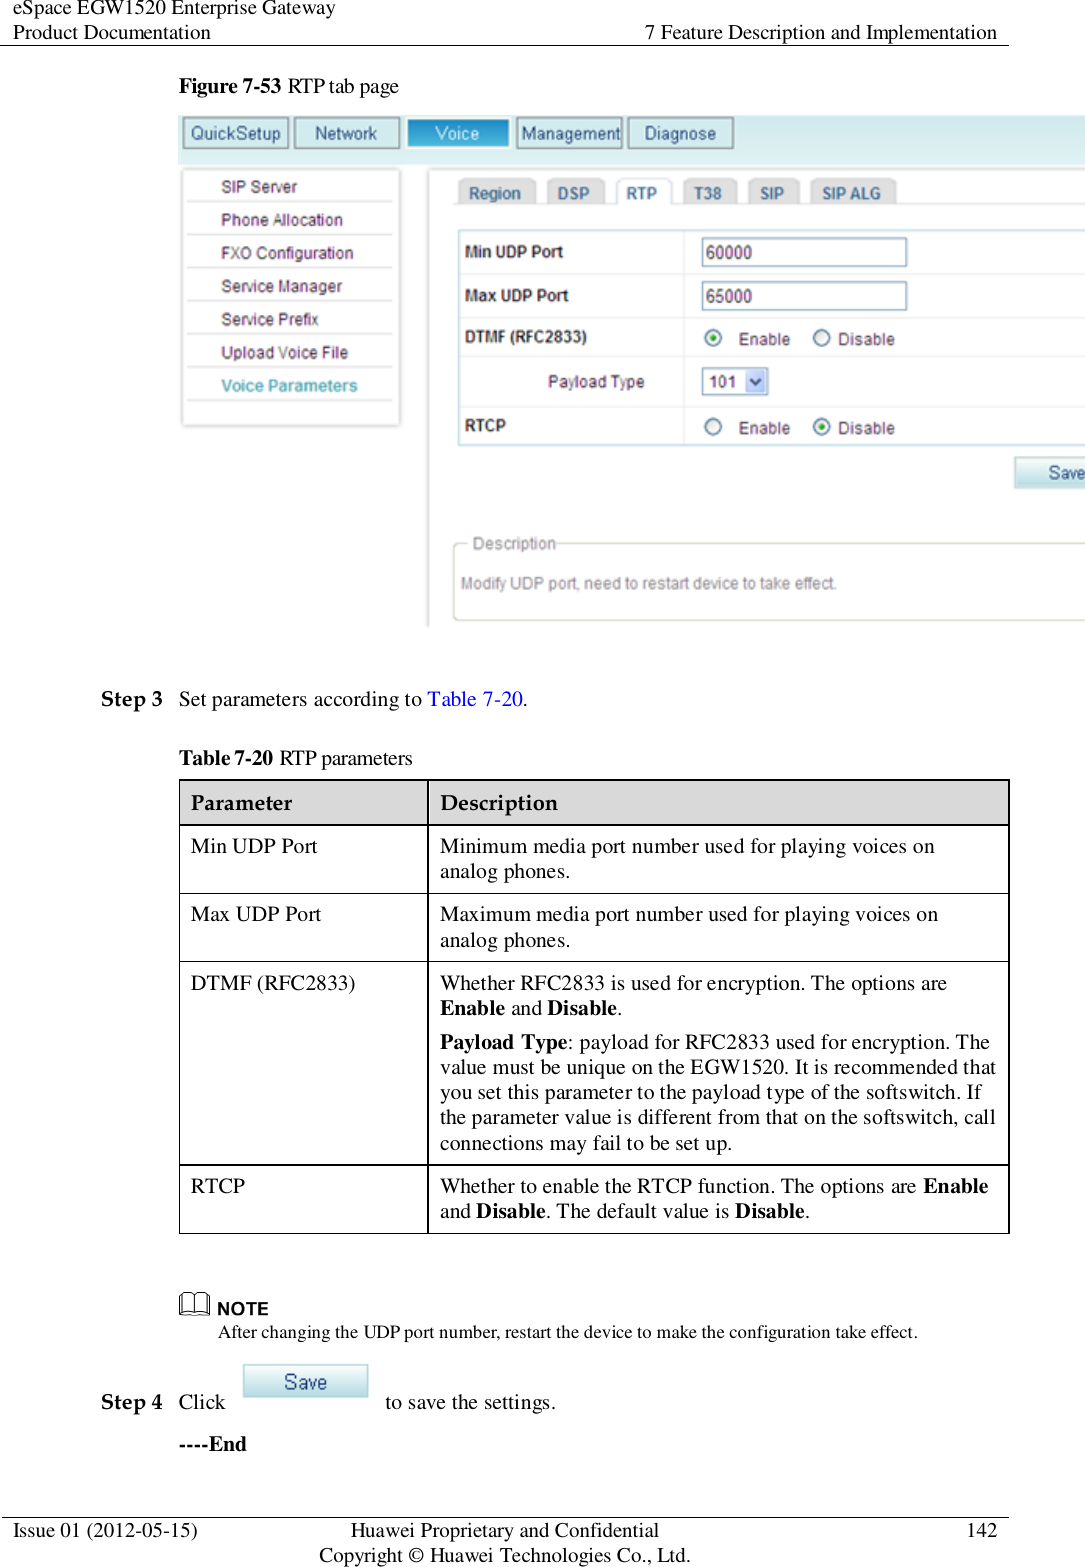 eSpace EGW1520 Enterprise Gateway Product Documentation 7 Feature Description and Implementation  Issue 01 (2012-05-15) Huawei Proprietary and Confidential                                     Copyright © Huawei Technologies Co., Ltd. 142  Figure 7-53 RTP tab page   Step 3 Set parameters according to Table 7-20. Table 7-20 RTP parameters Parameter Description Min UDP Port Minimum media port number used for playing voices on analog phones. Max UDP Port Maximum media port number used for playing voices on analog phones. DTMF (RFC2833) Whether RFC2833 is used for encryption. The options are Enable and Disable. Payload Type: payload for RFC2833 used for encryption. The value must be unique on the EGW1520. It is recommended that you set this parameter to the payload type of the softswitch. If the parameter value is different from that on the softswitch, call connections may fail to be set up. RTCP Whether to enable the RTCP function. The options are Enable and Disable. The default value is Disable.   After changing the UDP port number, restart the device to make the configuration take effect. Step 4 Click    to save the settings. ----End 